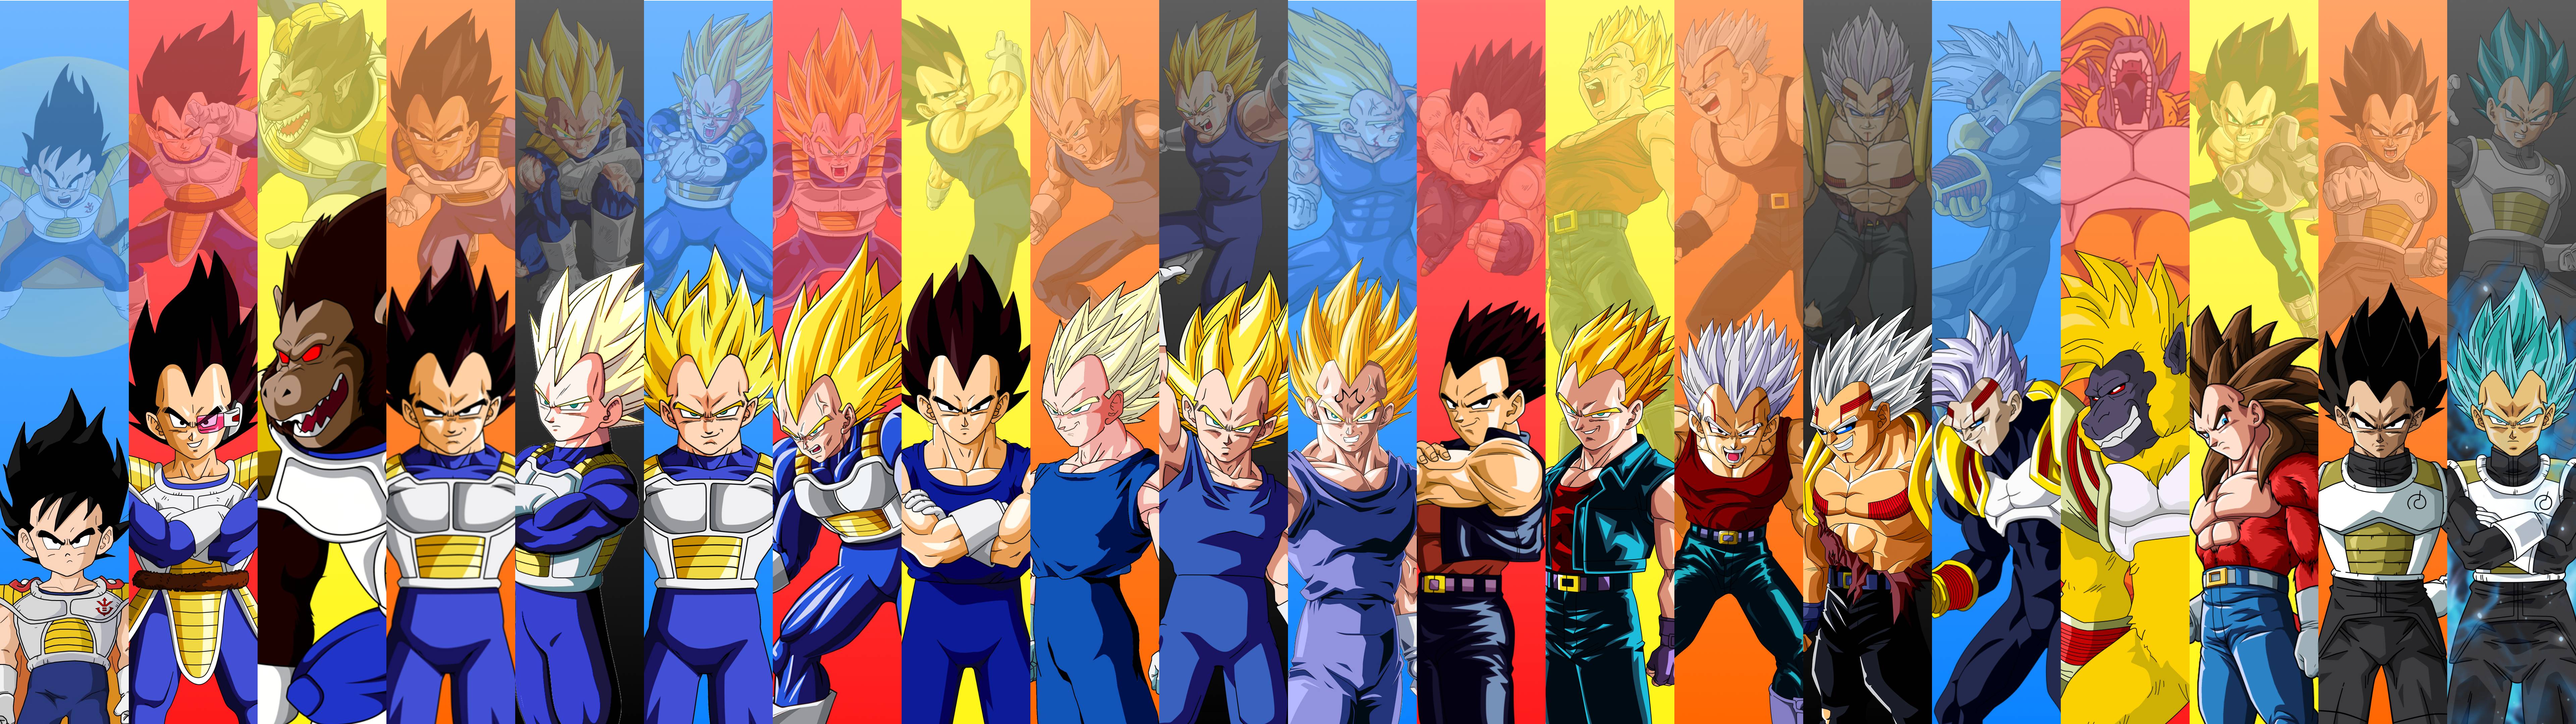 Super Saiyan and Trunks Art Dragon Ball Wallpaper HD Anime 4K Wallpapers  Images and Background  Wallpapers Den